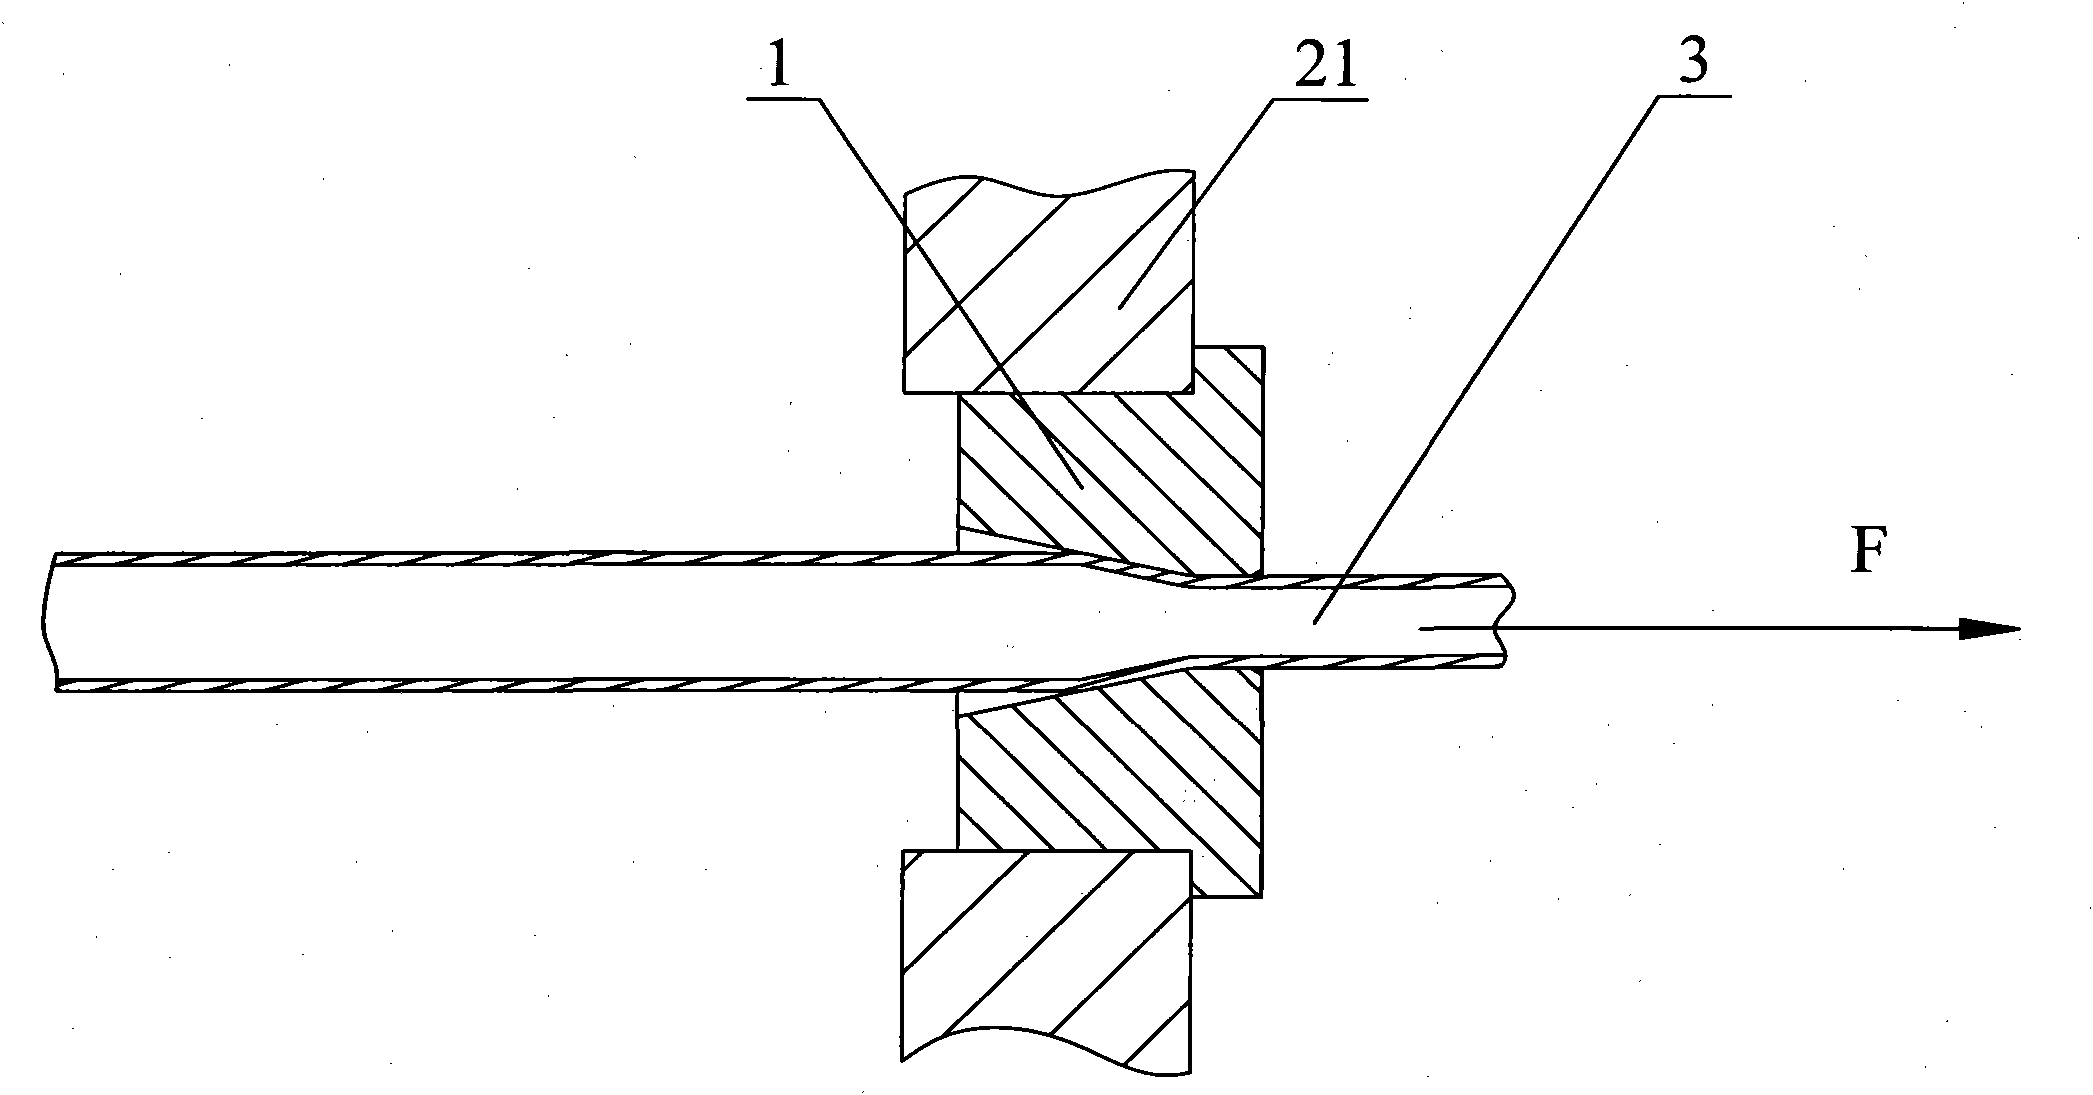 Multi-stage drawing manufacturing method for superfine fluted tube